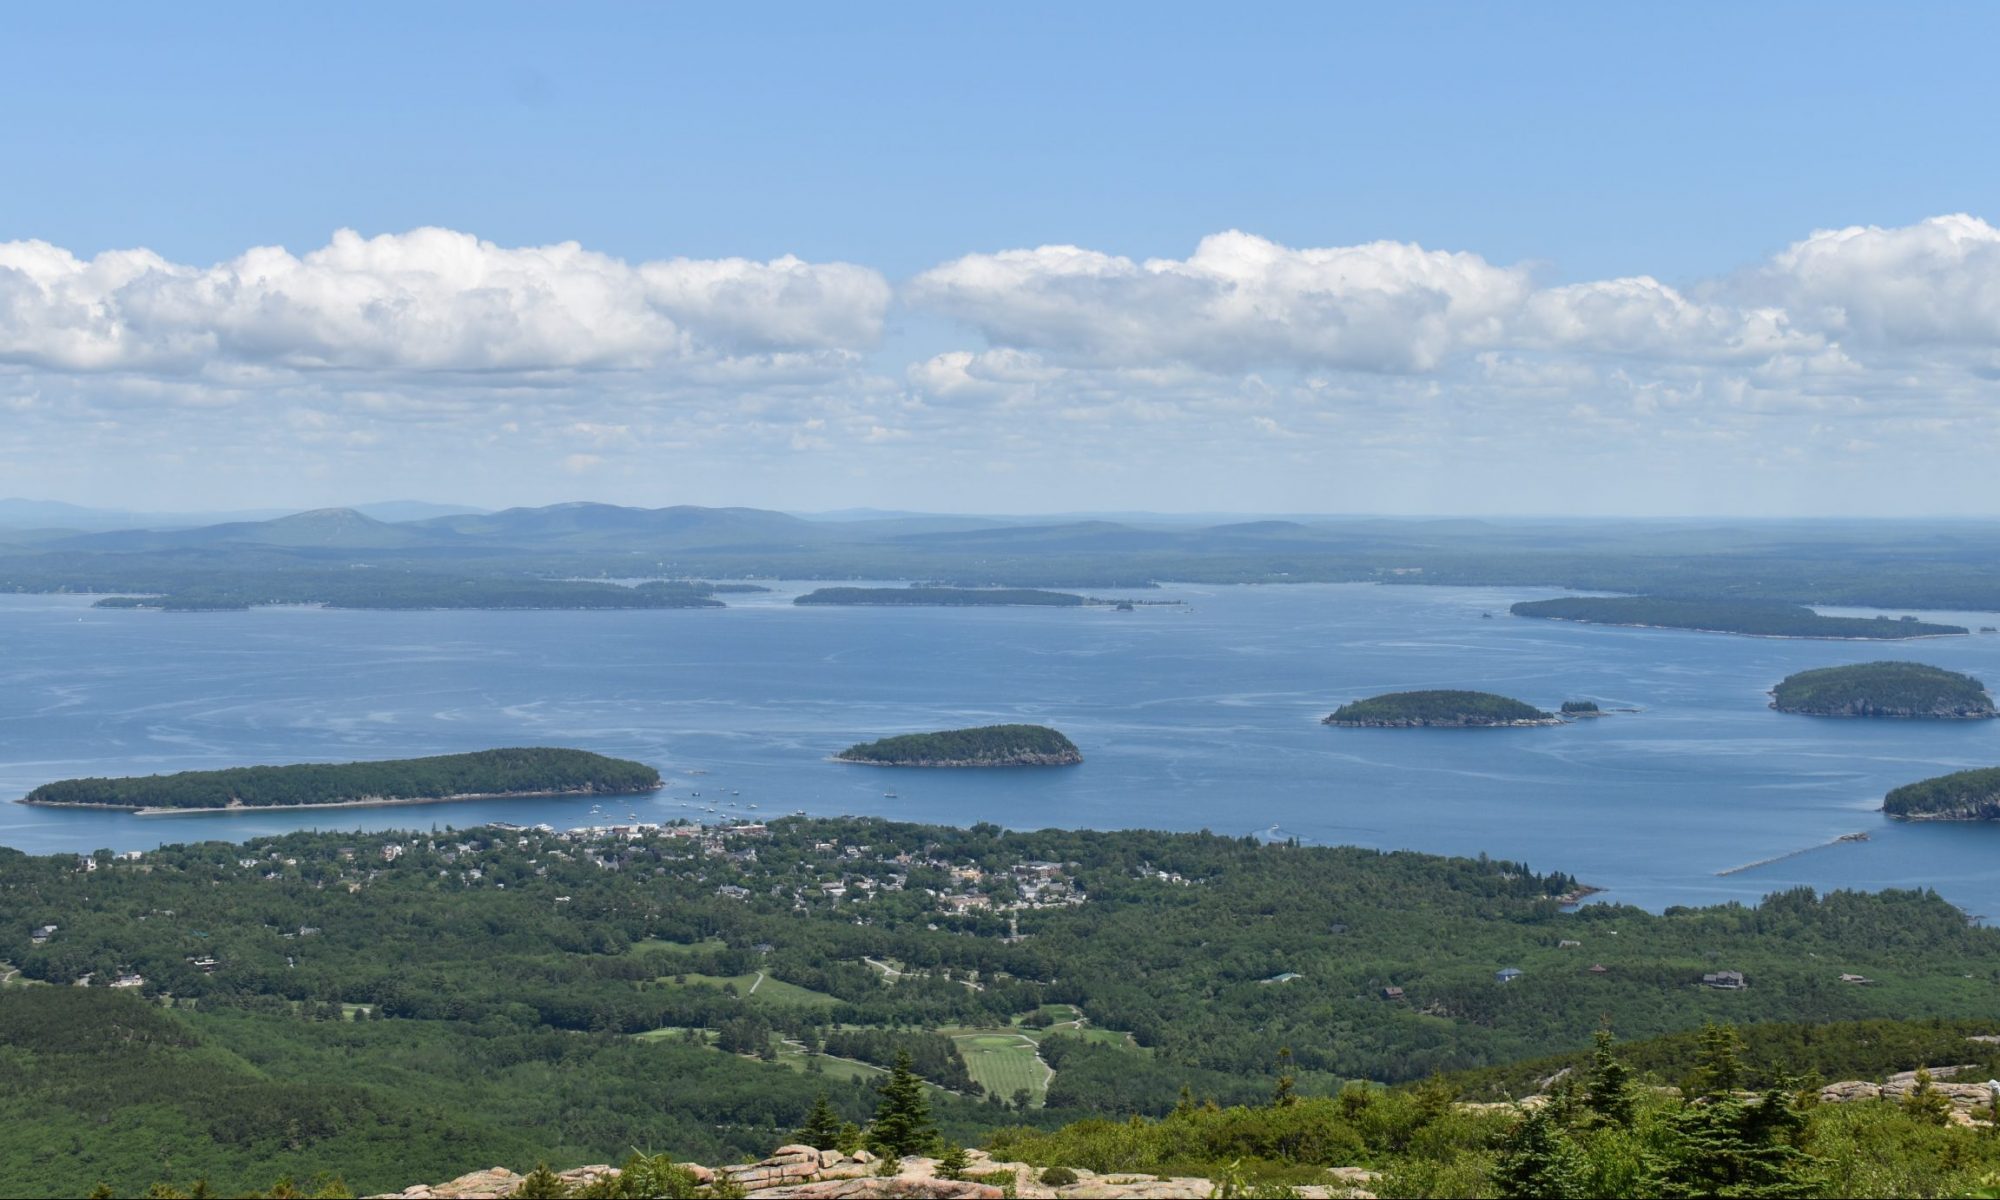 View of the Porcupine Islands from the top of Cadillac Mountain in Acadia.